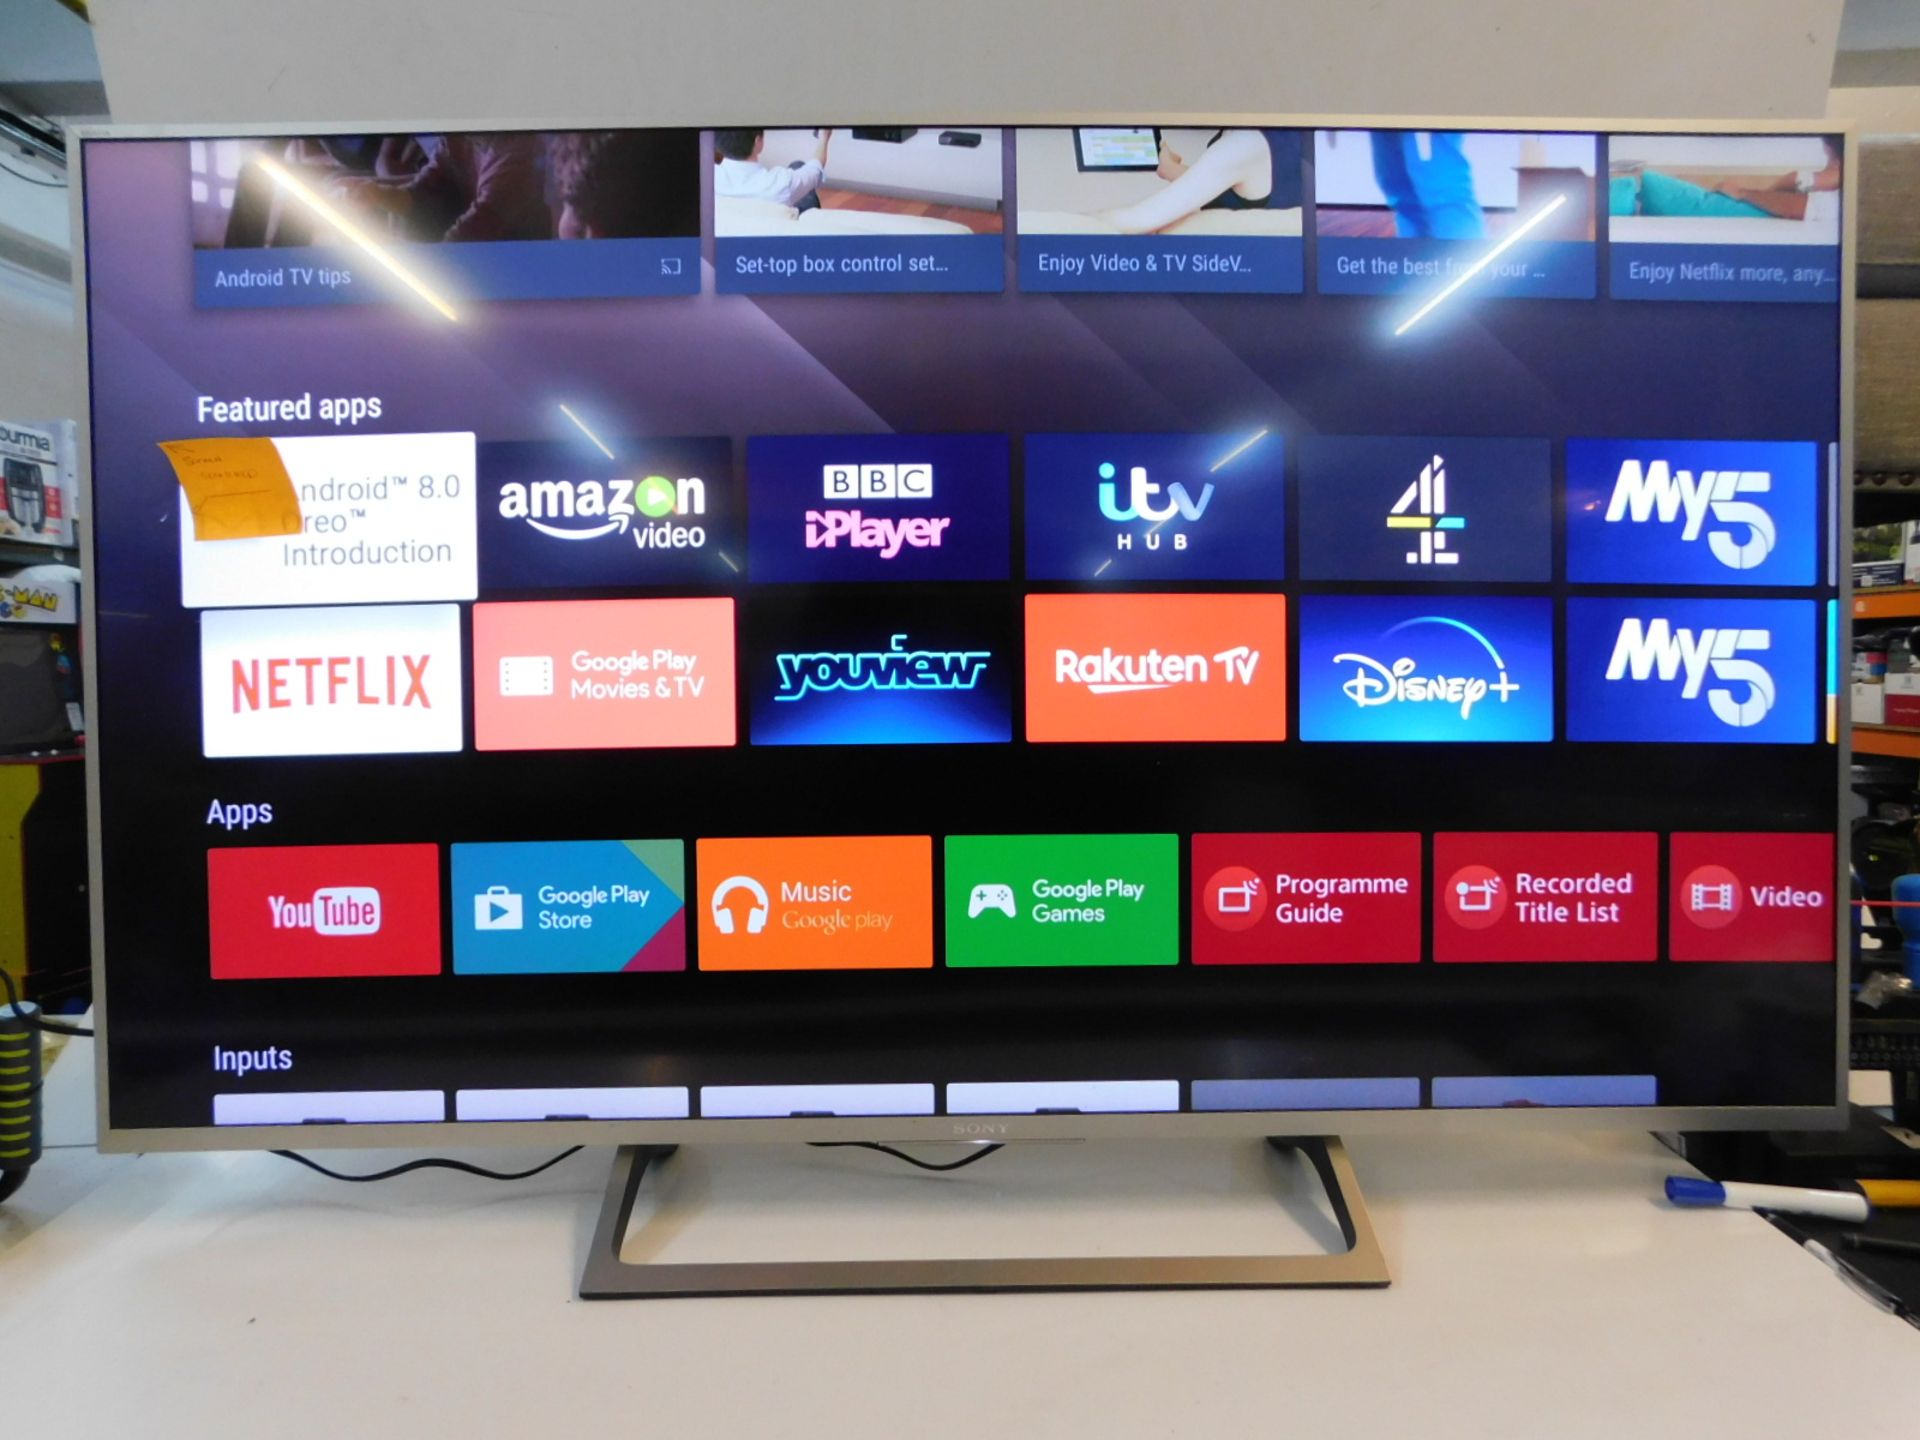 1 SONY BRAVIA KD-55XE8577 55" 4K UHD LED LCD INTERNET TV WITH STAND AND REMOTE RRP Â£499 (